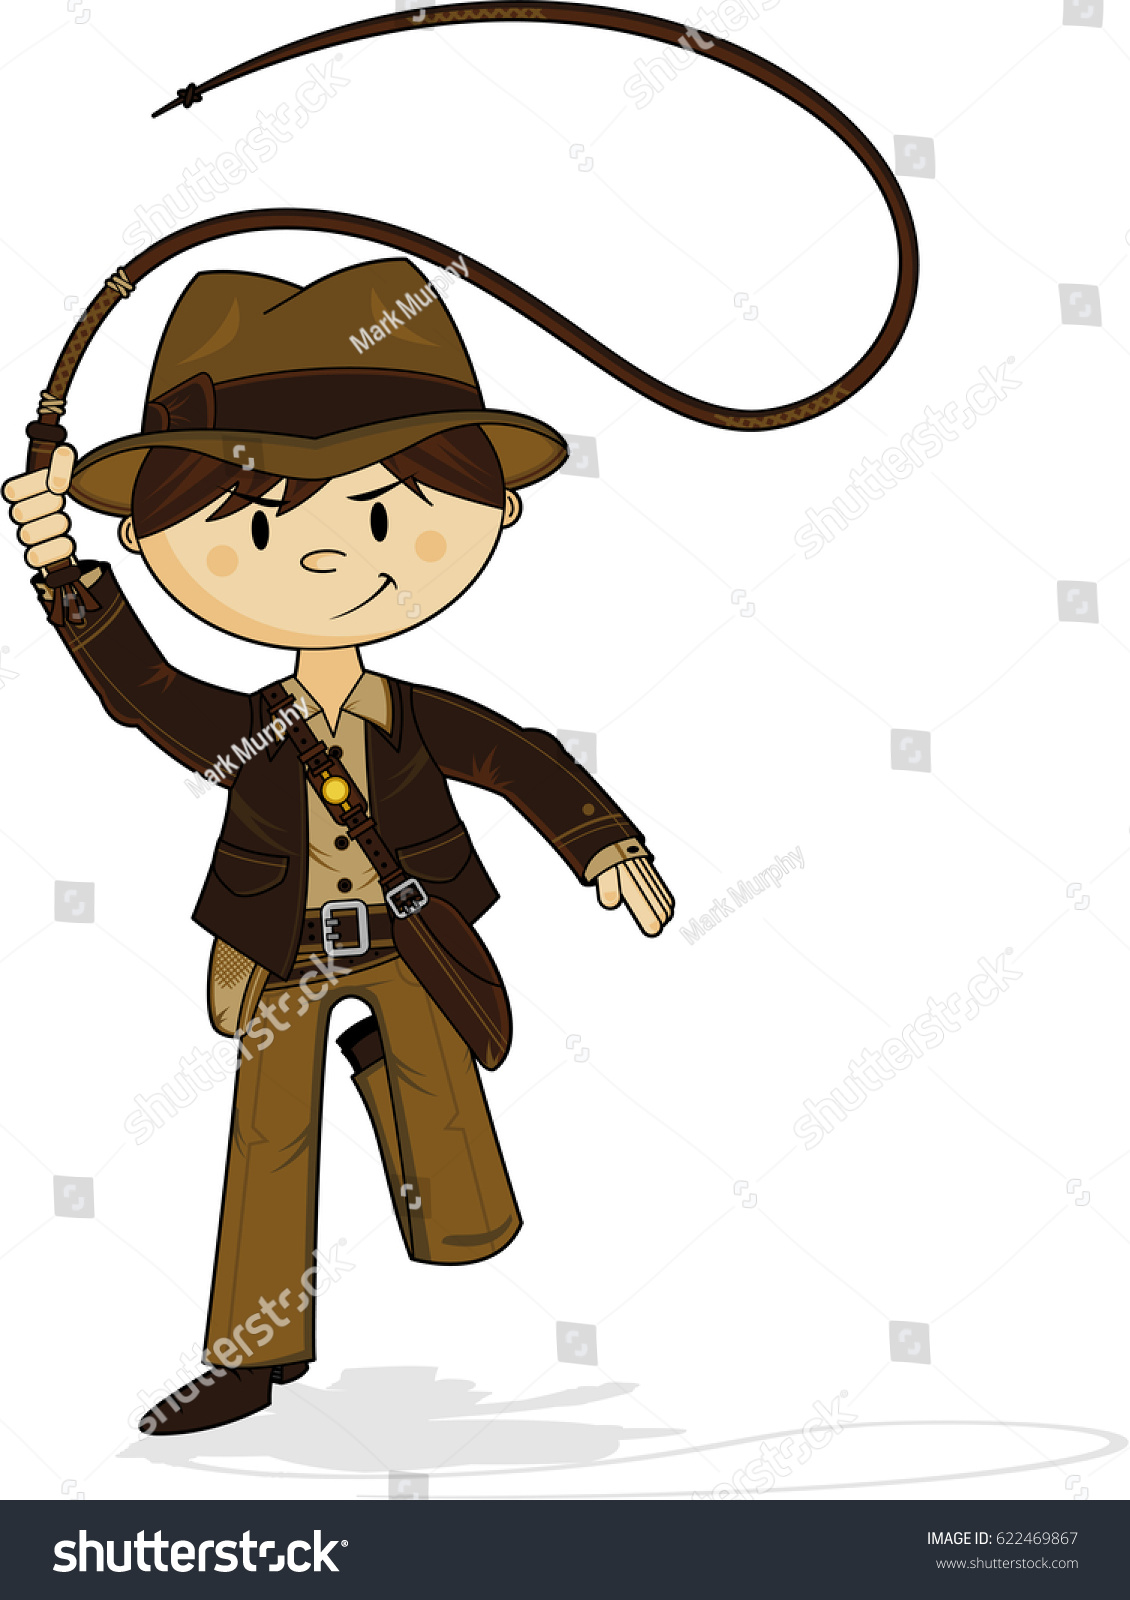 Cartoon Explorer Whip Stock Vector Royalty Free 622469867 5,071 likes · 2,187 talking about this. https www shutterstock com image vector cartoon explorer whip 622469867